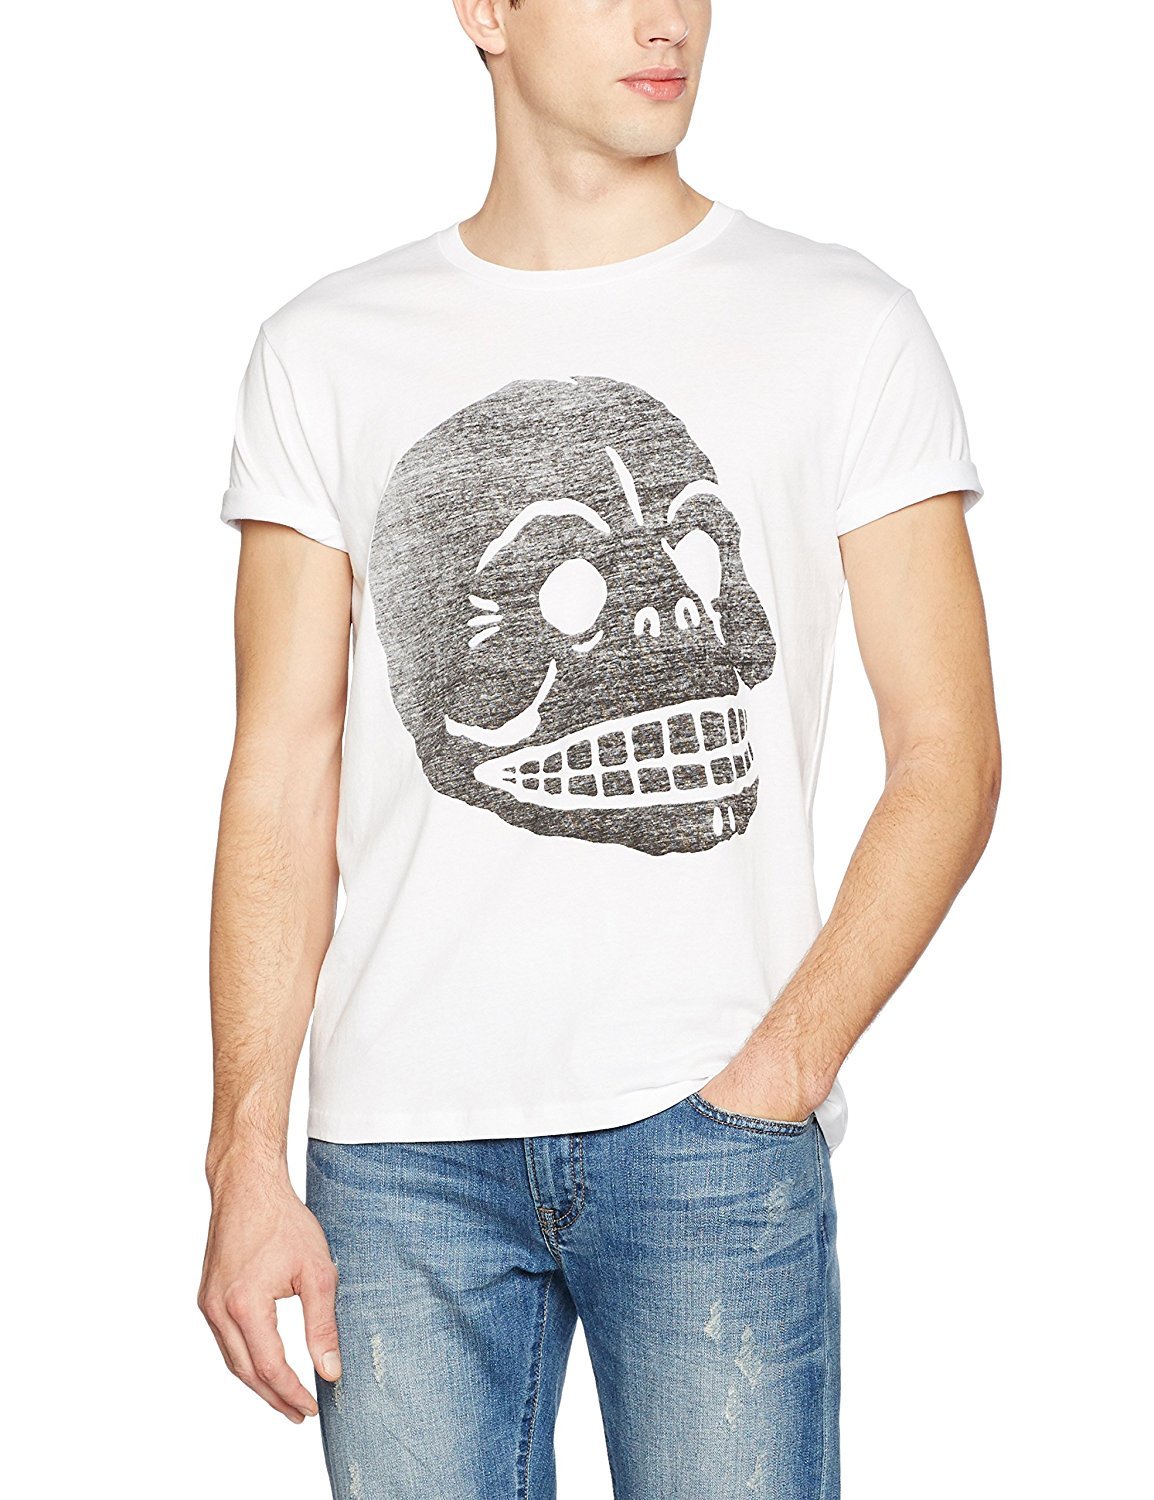 Cheap Monday Mens Standard Tee Filled Skull T-Shirt - Stockpoint Apparel Outlet